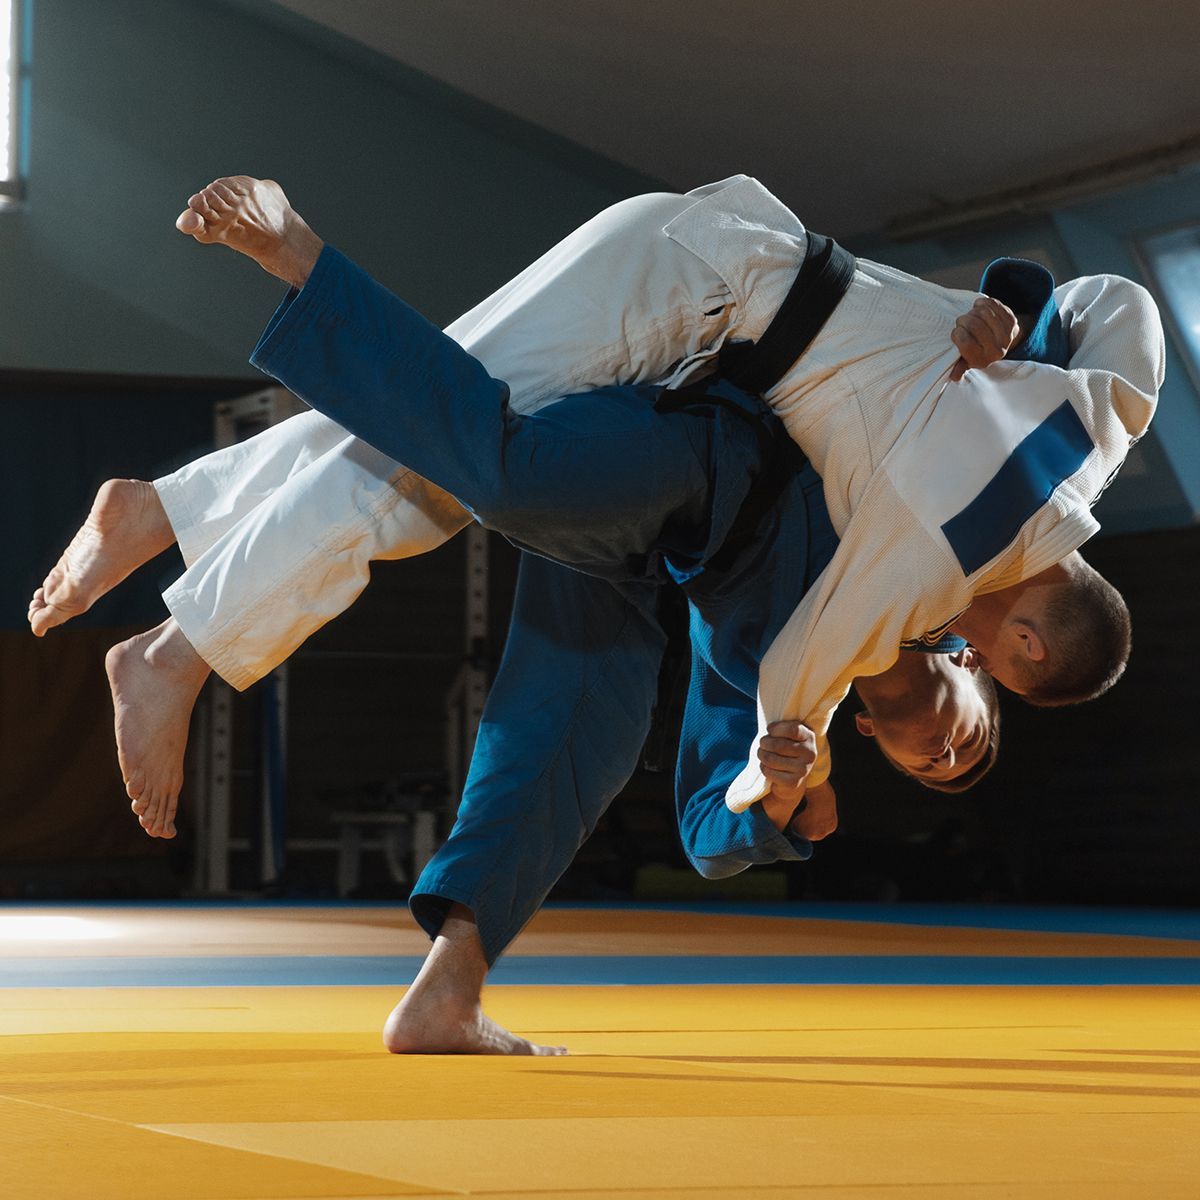 Two men are practicing judo on a mat in a gym.